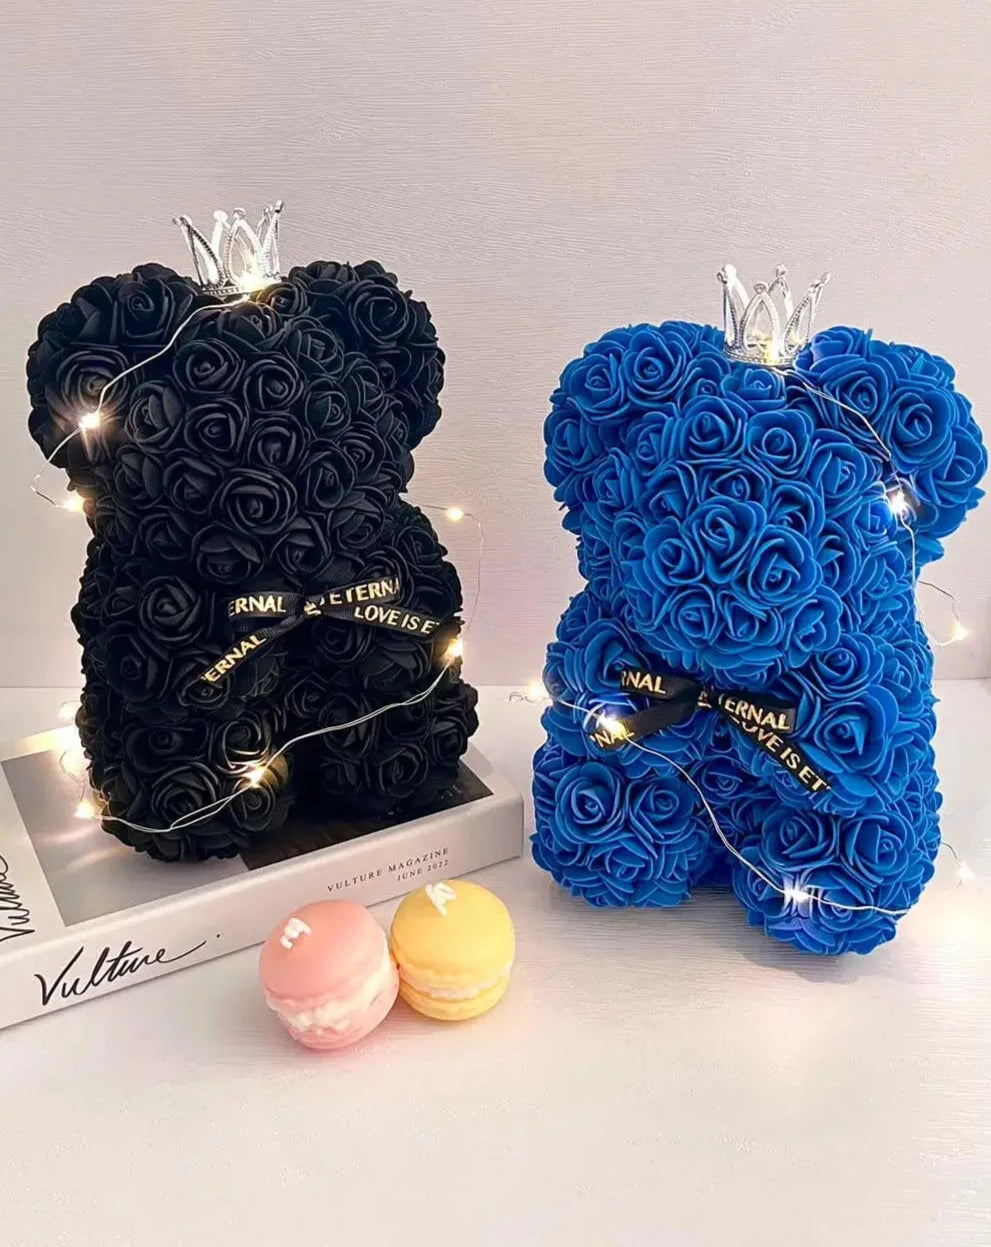 25cm Black and Blue Rose Bear with Fairy Lights The Rose Ark